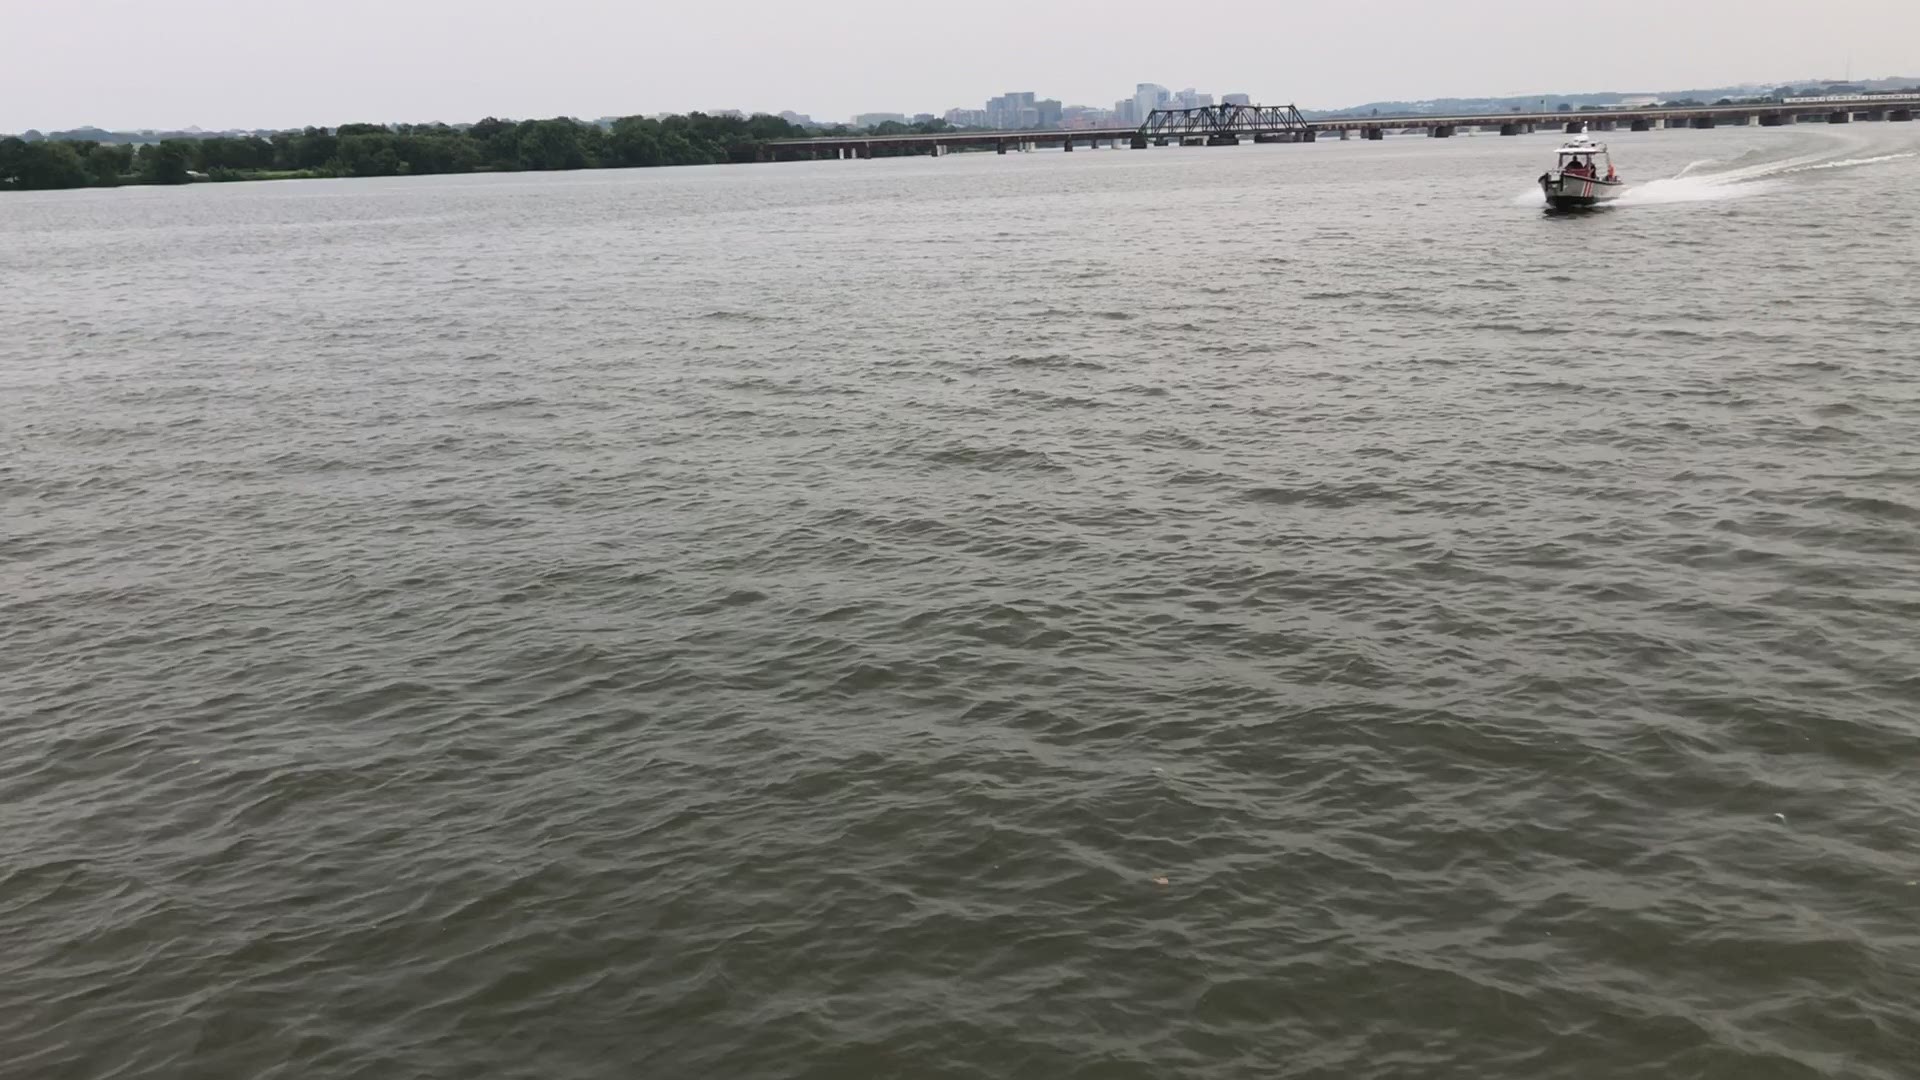 Officials are reminding people about the dangers of swimming in the Potomac and Anacostia rivers amid hot weather impacting DC communities.